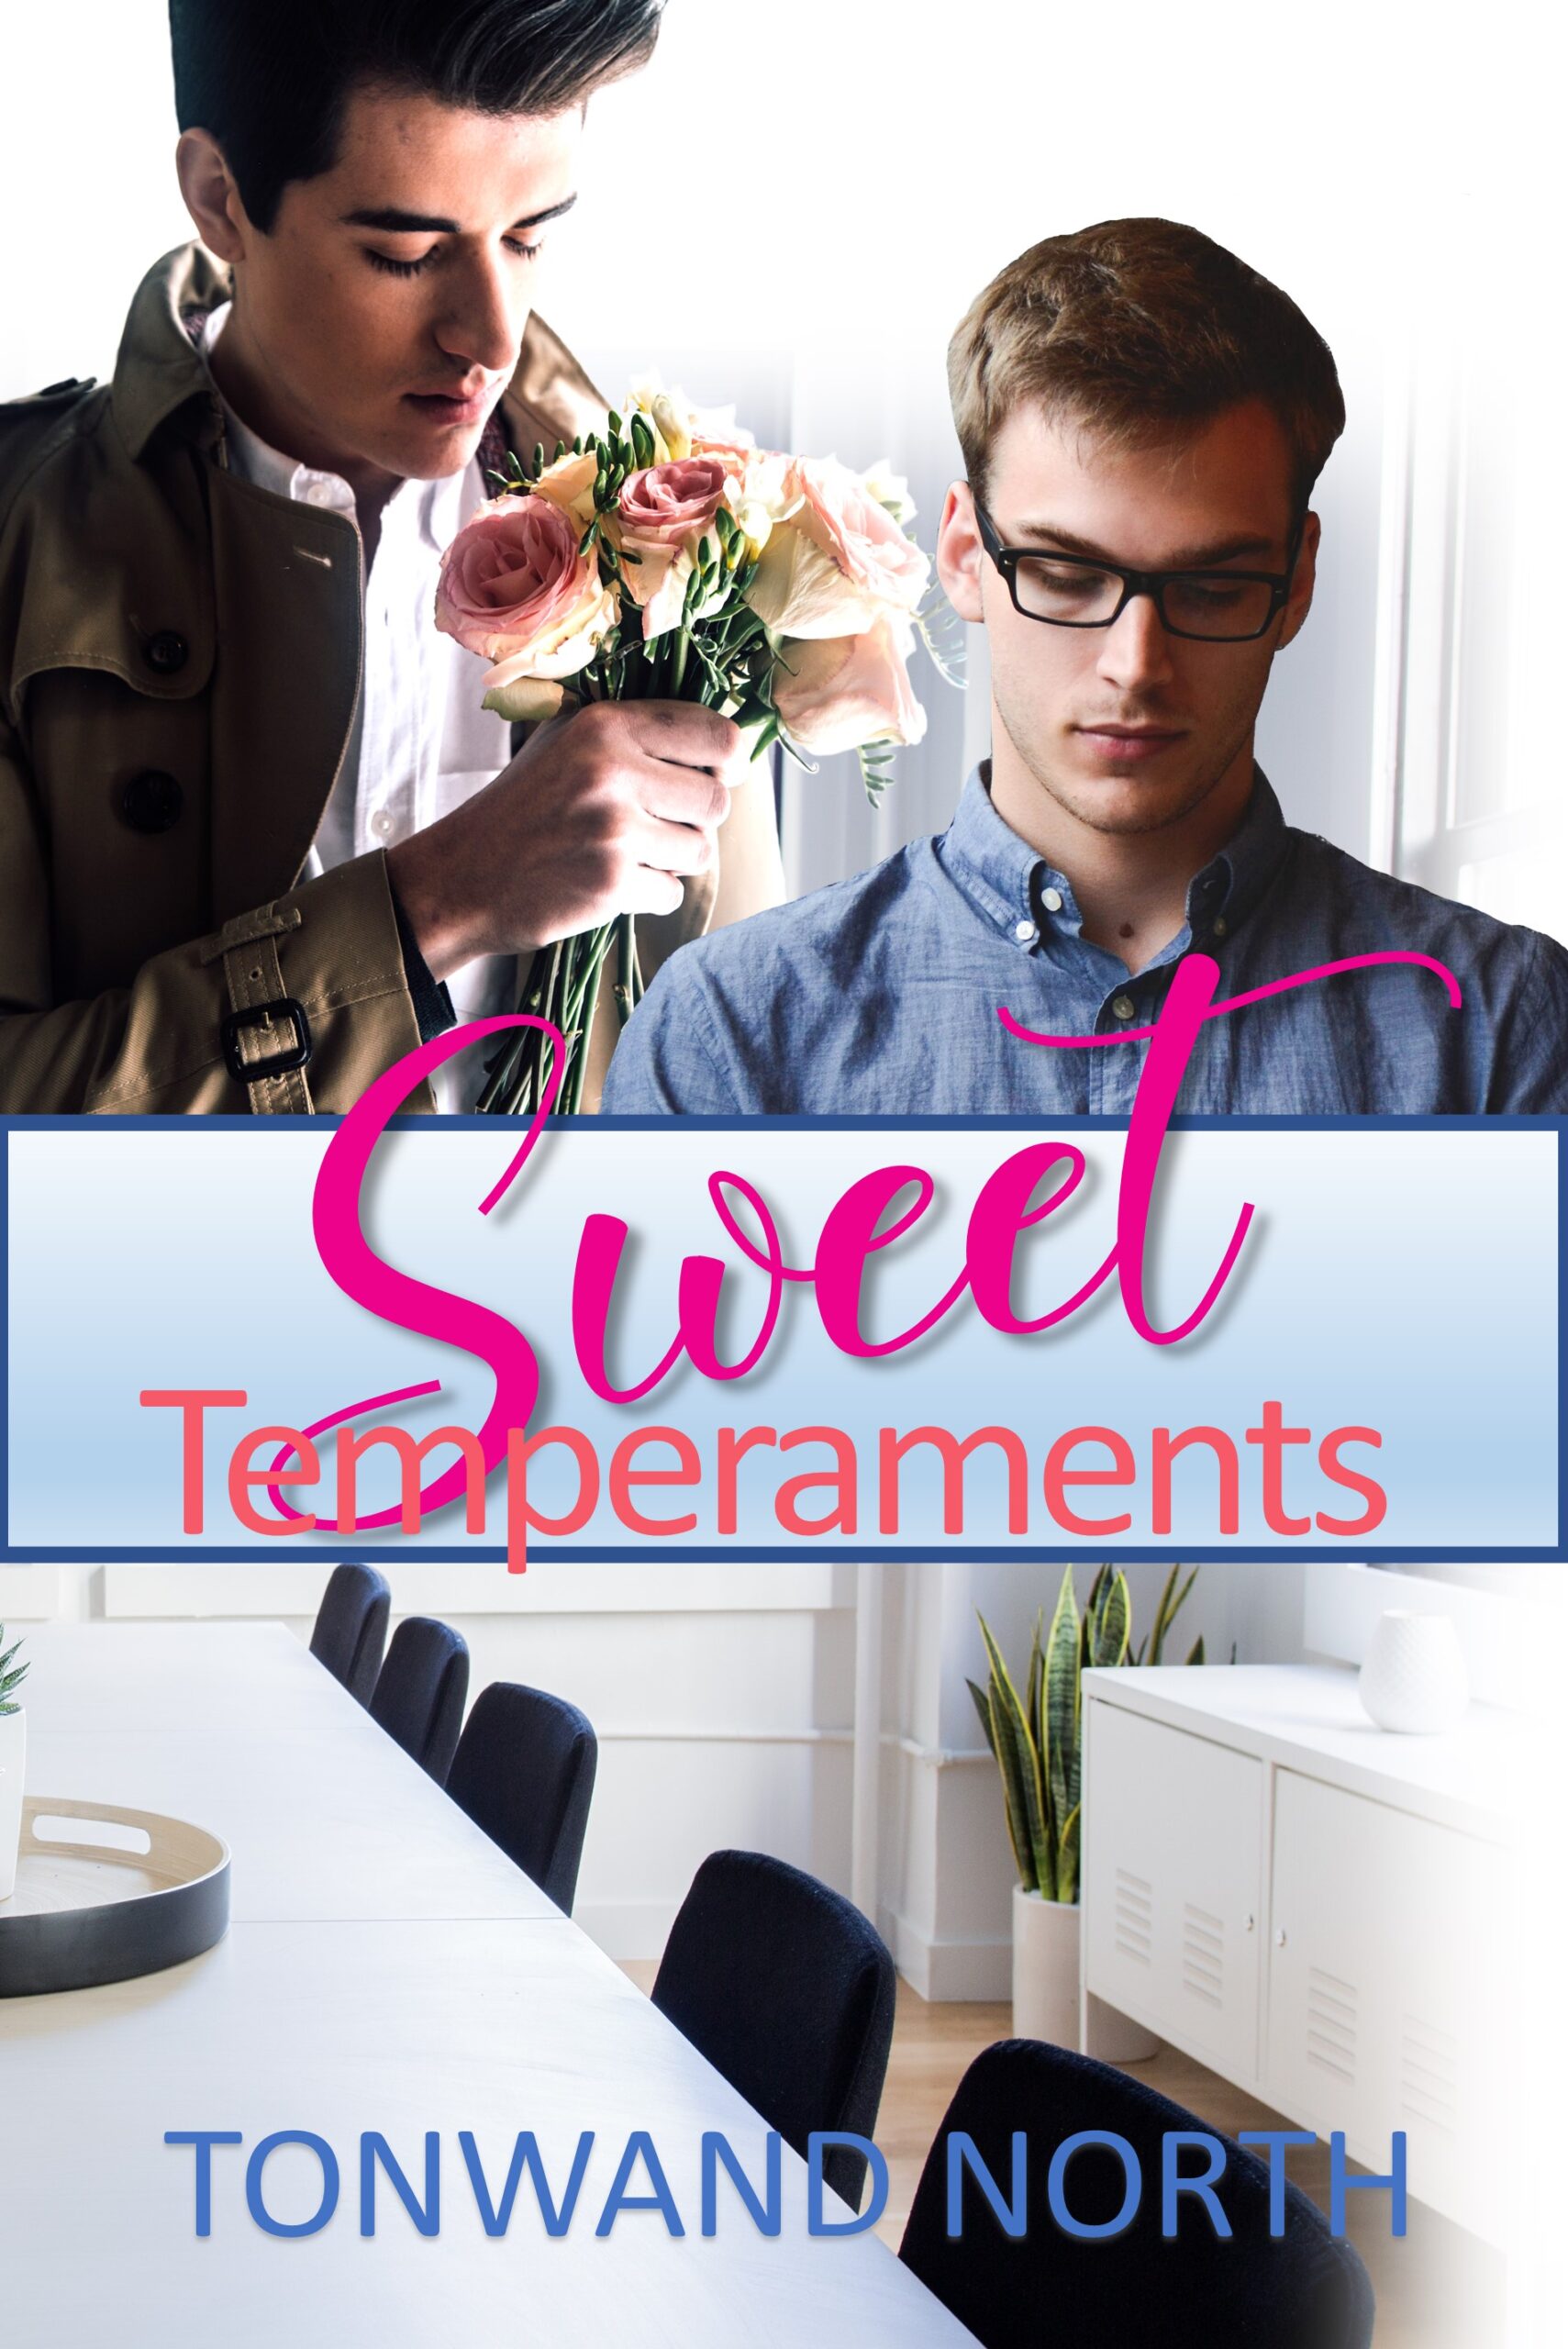 FREE: Sweet Temperaments by Tonwand North